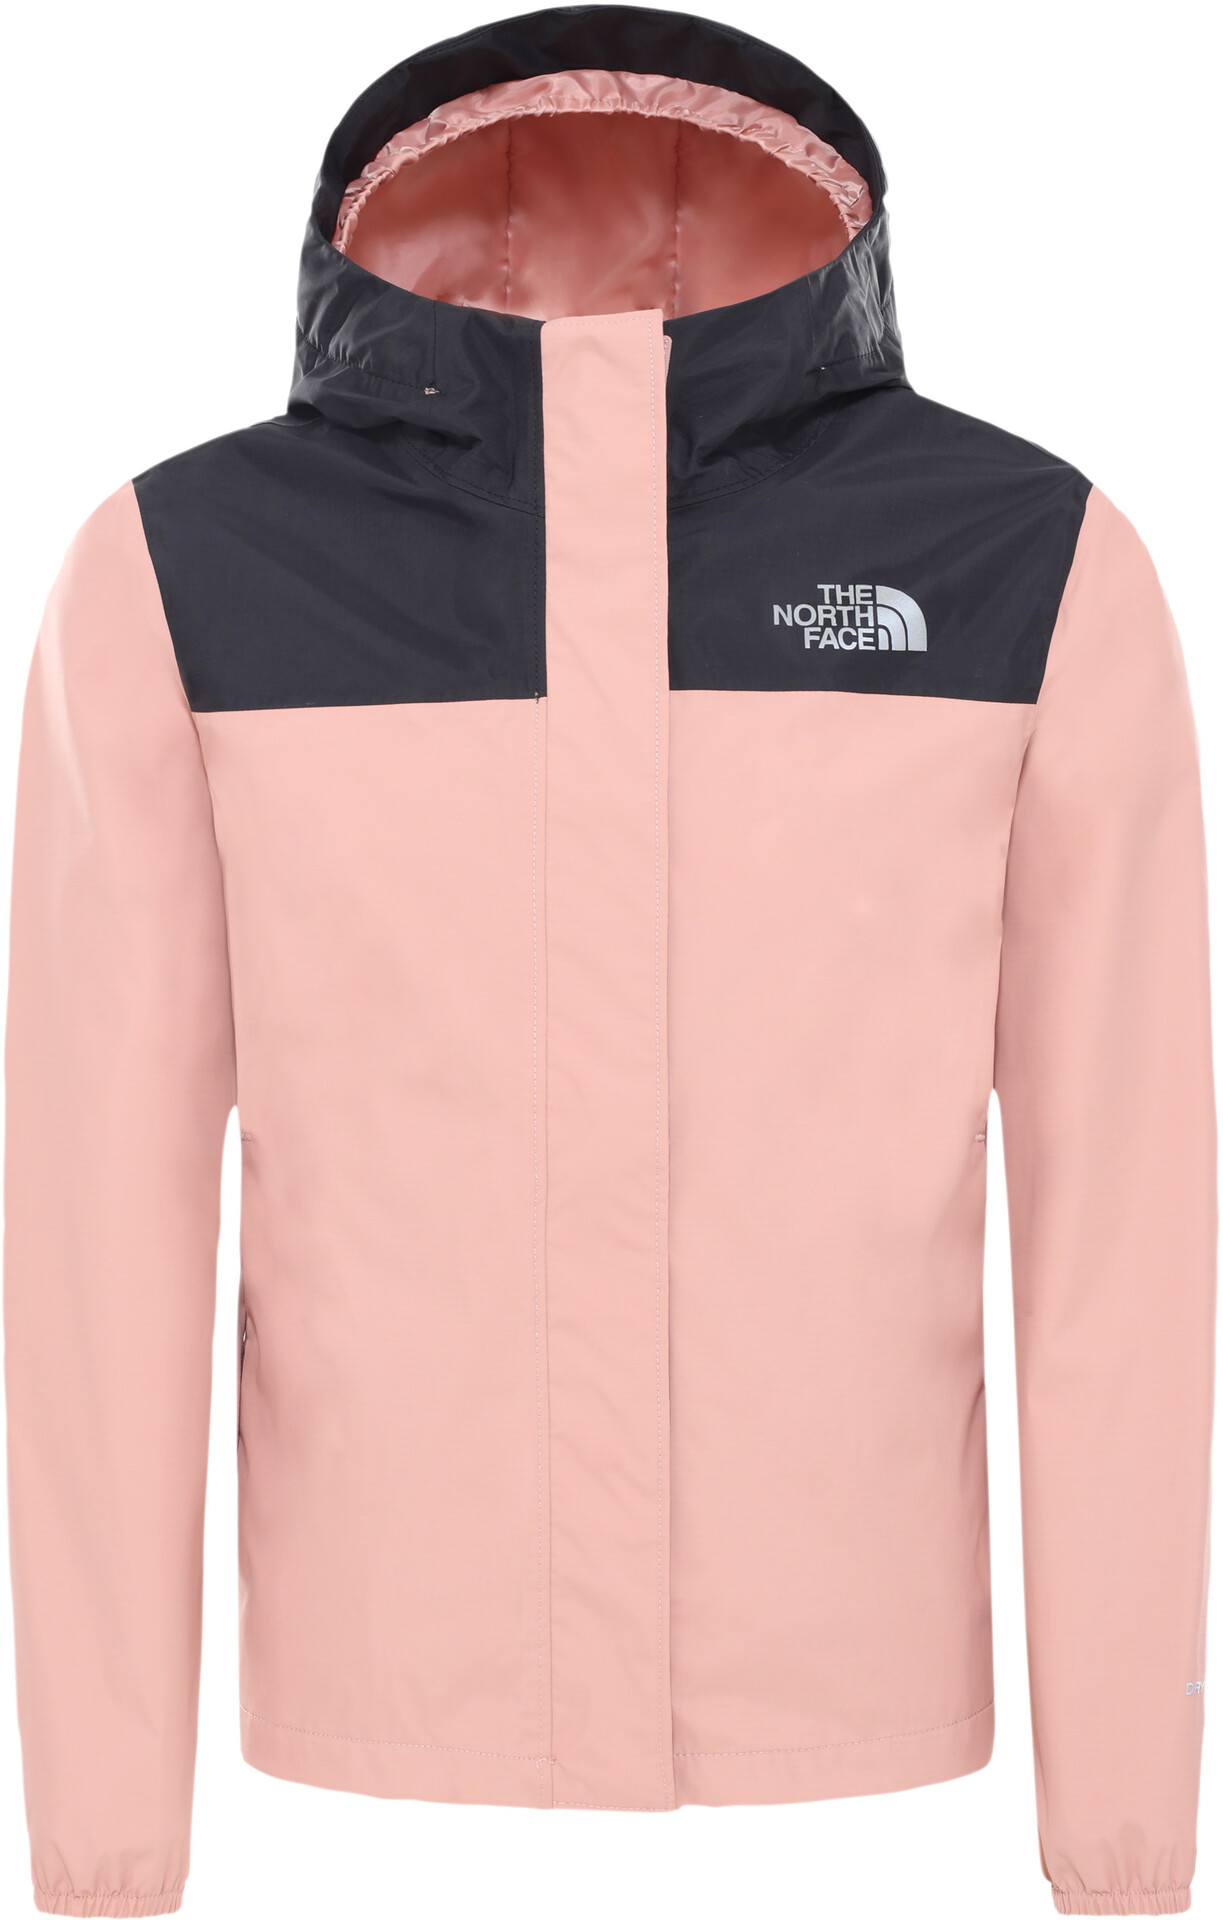 the north face jacket reflective